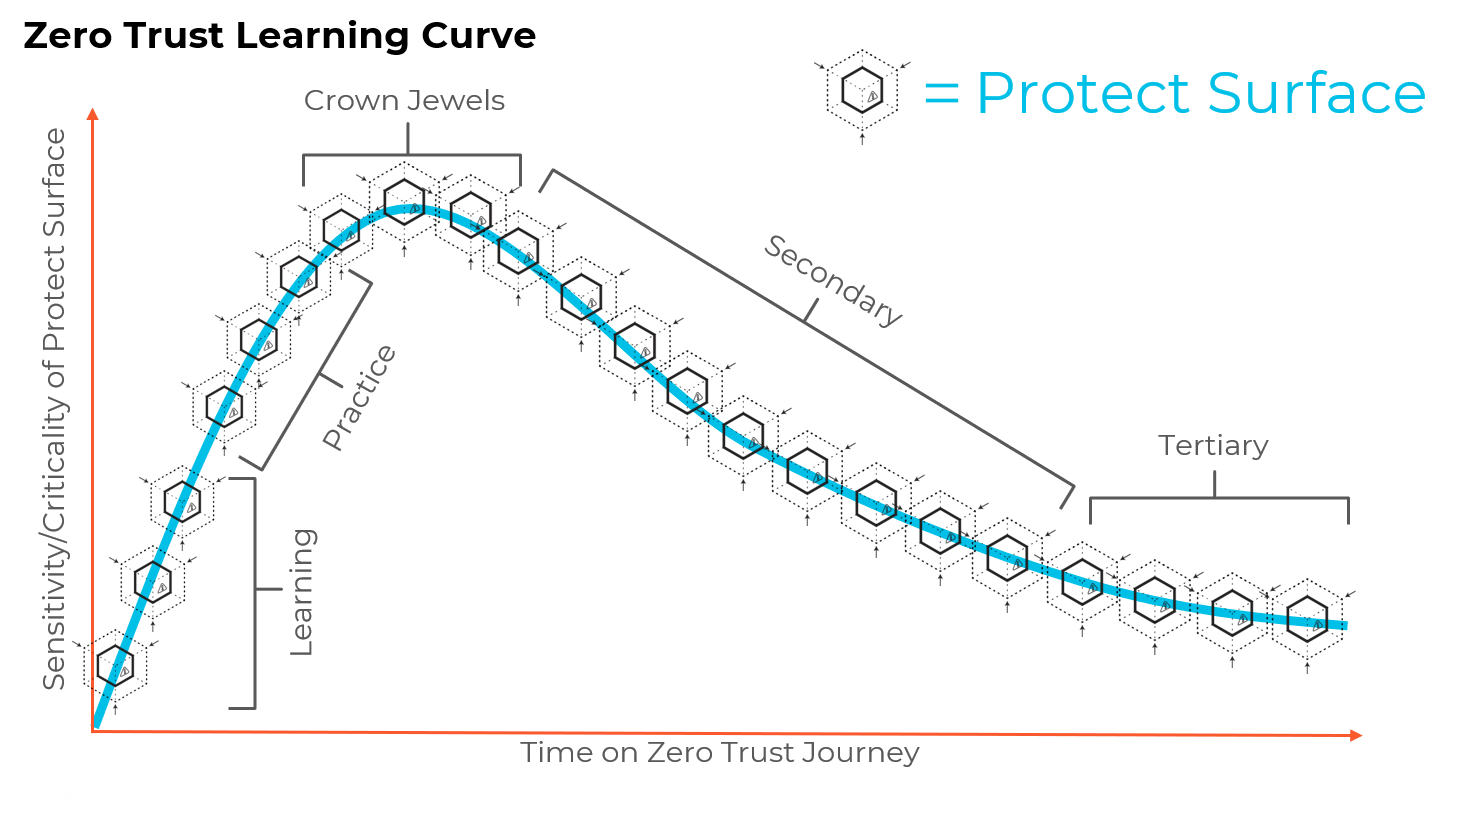 The Zero Trust Learning Curve is illustrated here, showing the sensitivity or criticality of a protect surface on one axis and the time on the Zero Trust journey on the other.